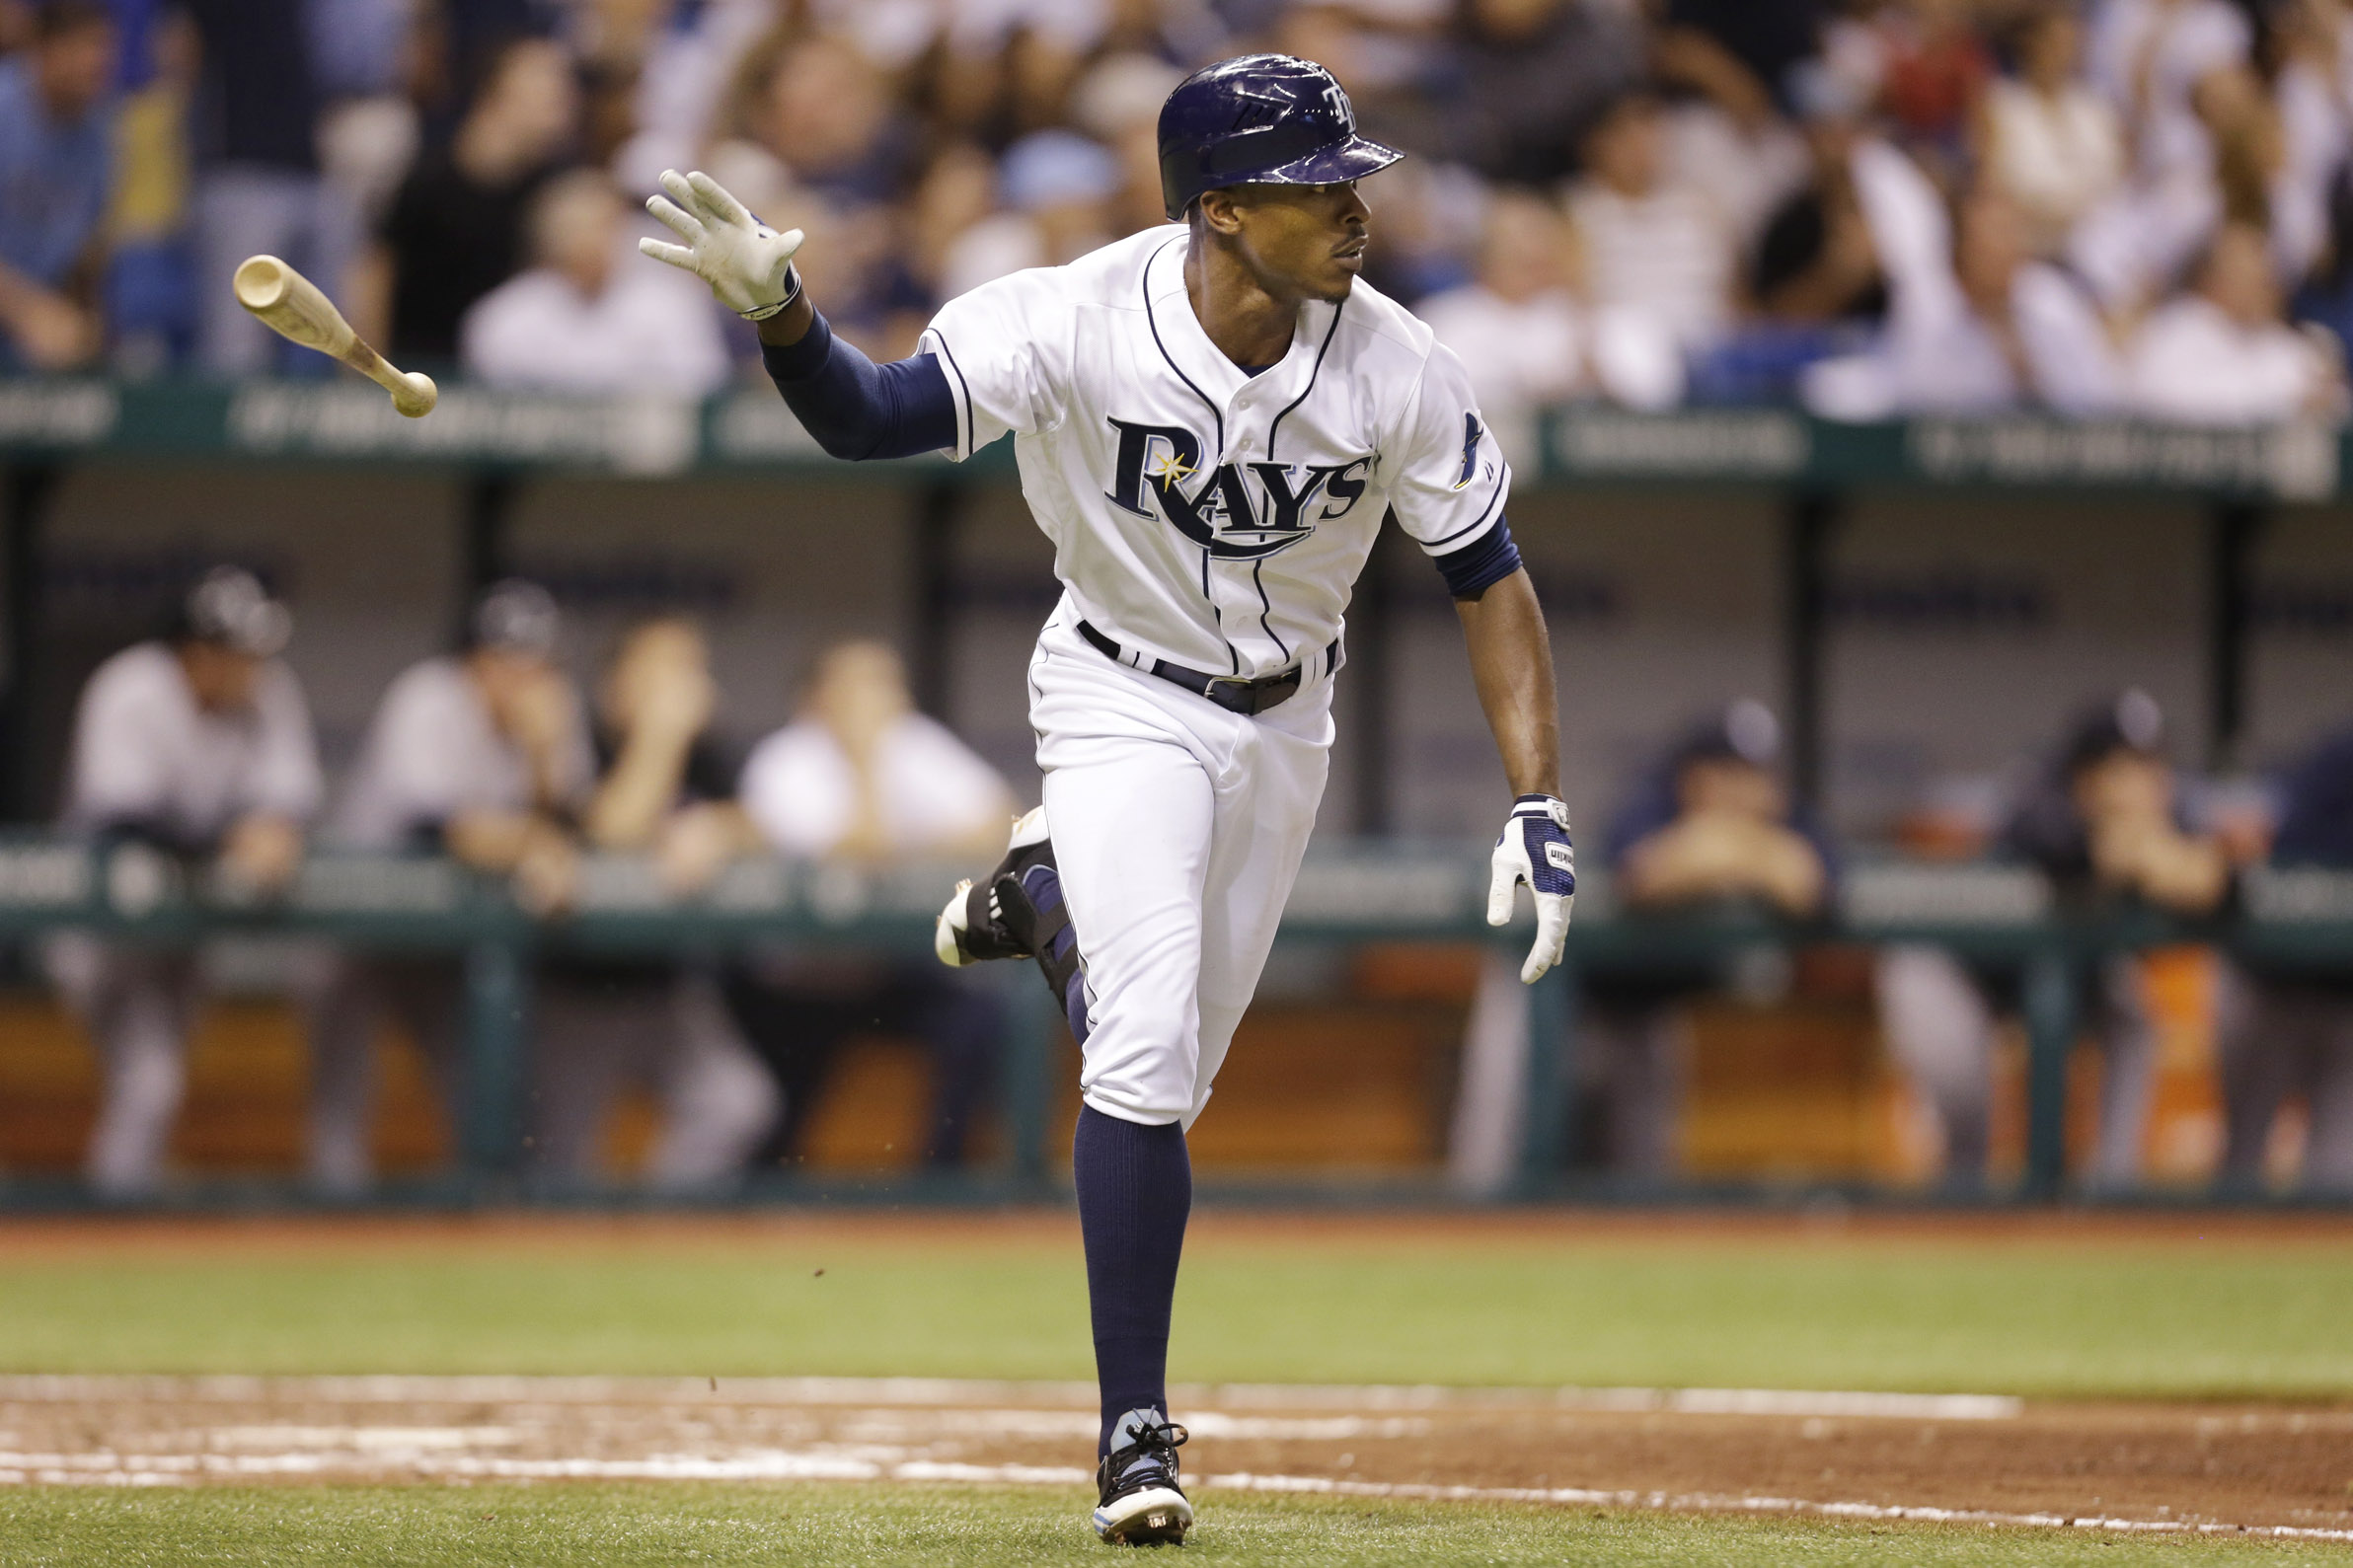 Randy Arozarena and Isaac Paredes lead the Rays win over Astros coining  their 20th victory